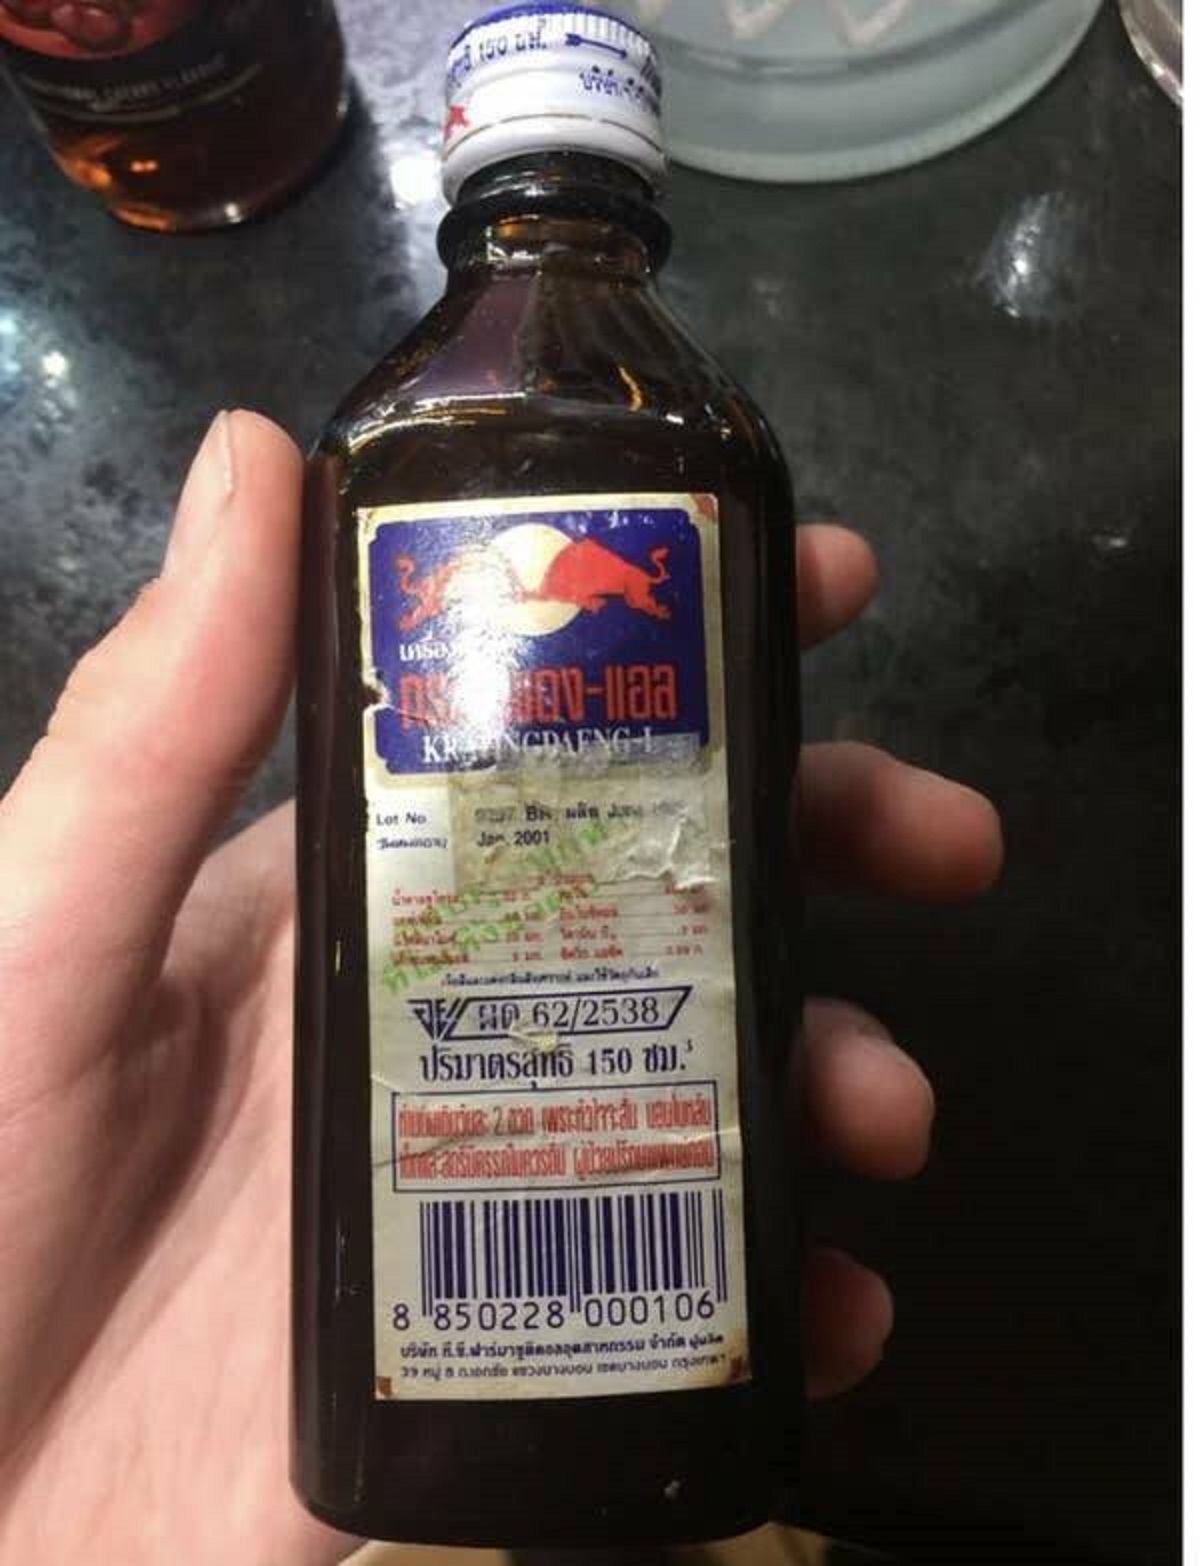 Here is what Red Bull used to look like, back when it was called Krating Daeng after being invented in Thailand.